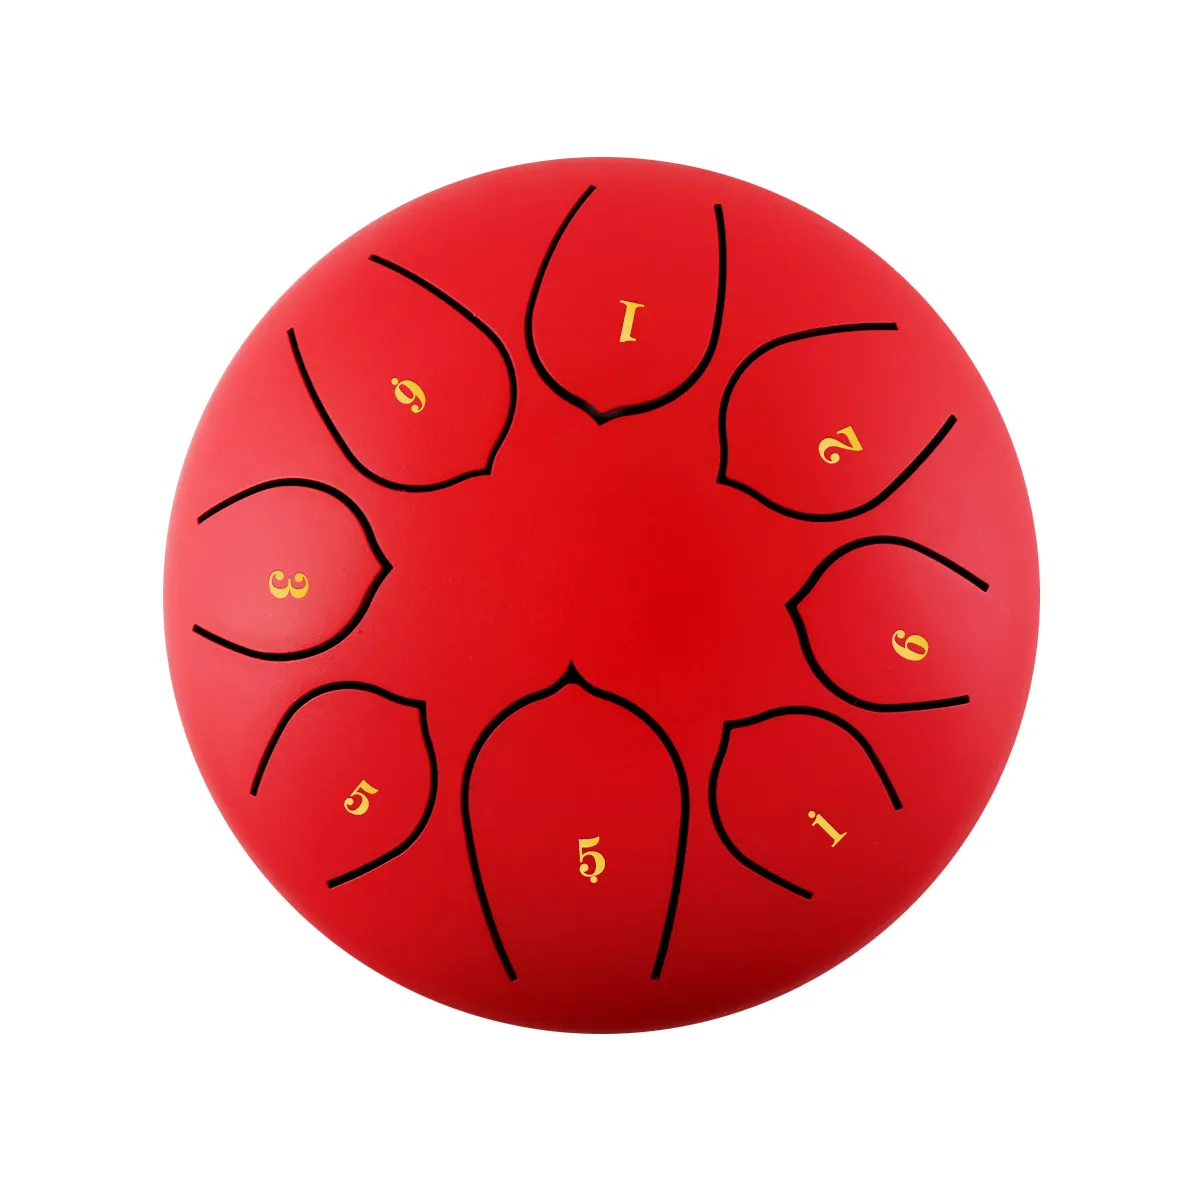 Hand Pan drum custom Logo Percussion Instrument Tongue Drums red for kids Mini Steel Tongue Drum 6 Inch 8 notes handpan